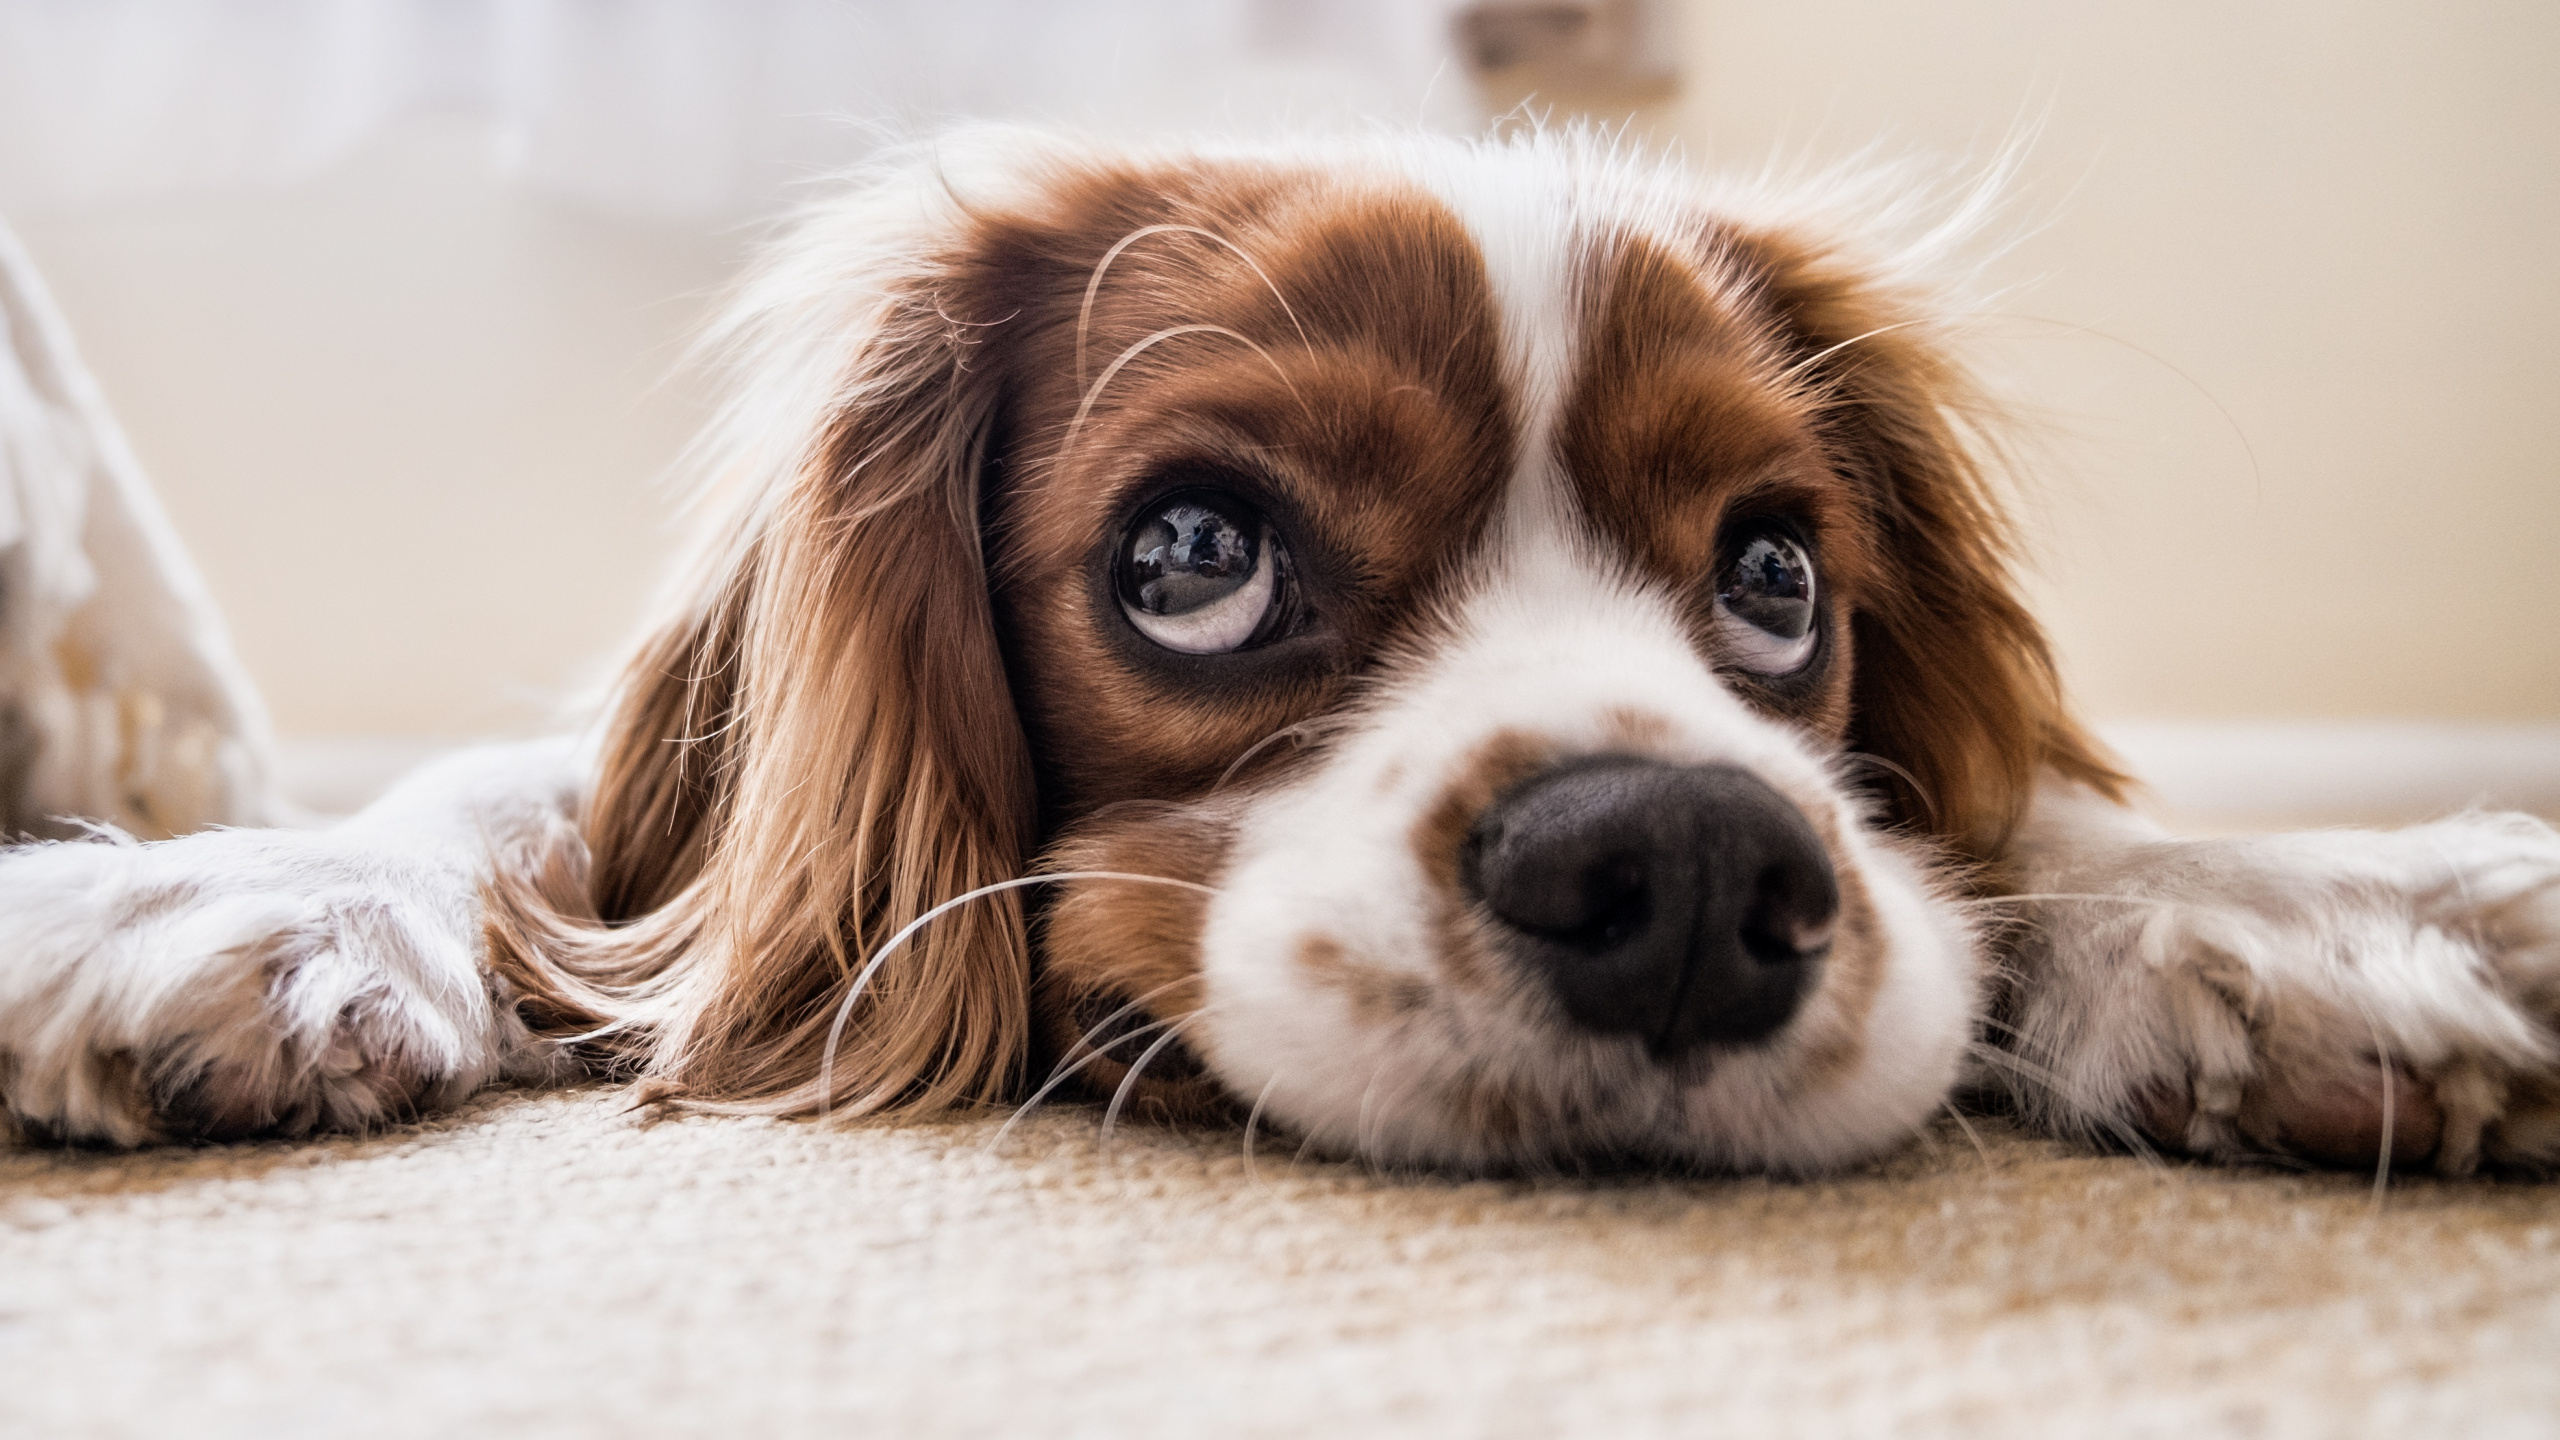 Wallpaper Cavalier King Charles Spaniel, Calm And Relaxed, , HD Wallpaper & Backgrounds